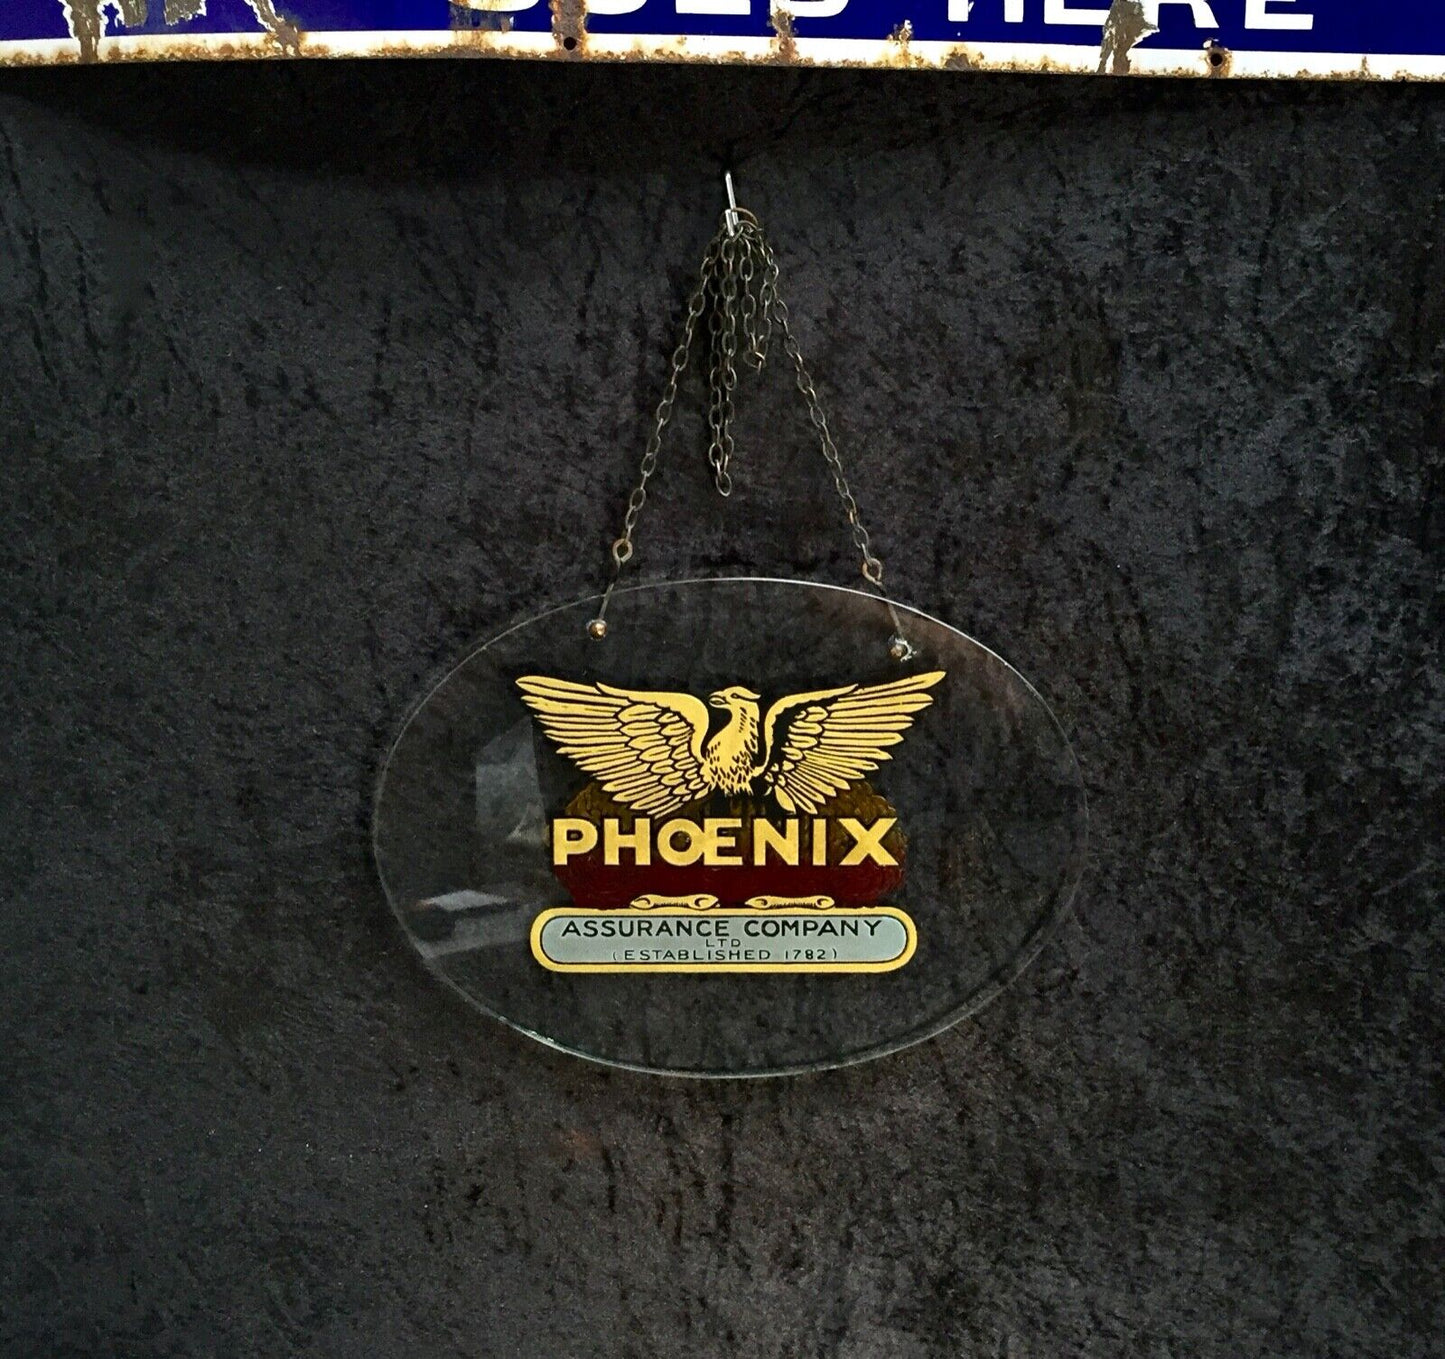 Antique Advertising - Vintage Glass Wall Sign for Phoenix Assurance Company ltd